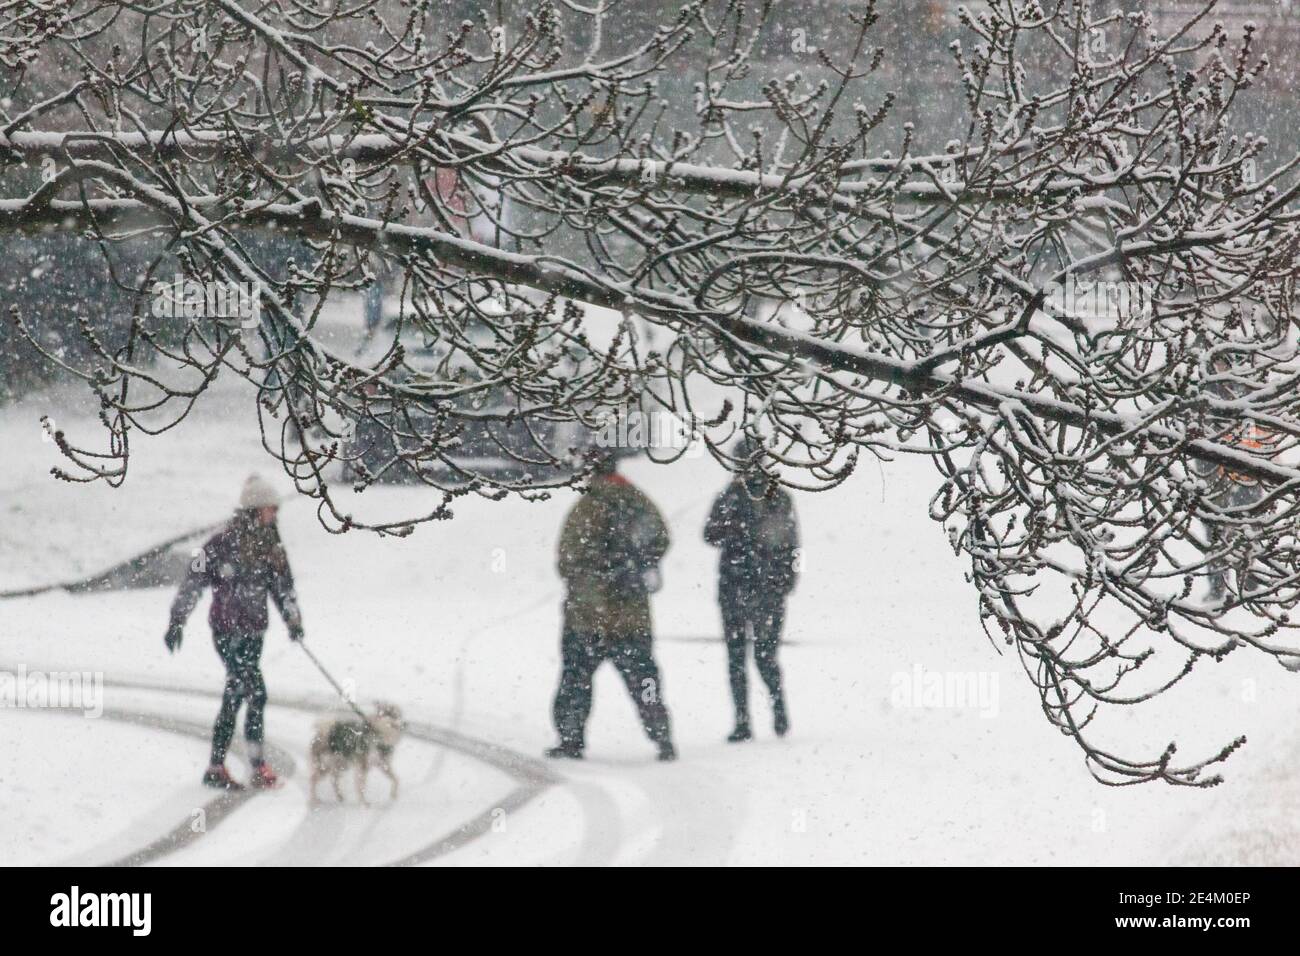 UK Weather, London, 24 January 2021: a rare snowfall reached the capital on Sunday morning, coating trees and rooves with about 2cm of snow over the course of 2 hours. Anna Watson/Alamy Live News Stock Photo